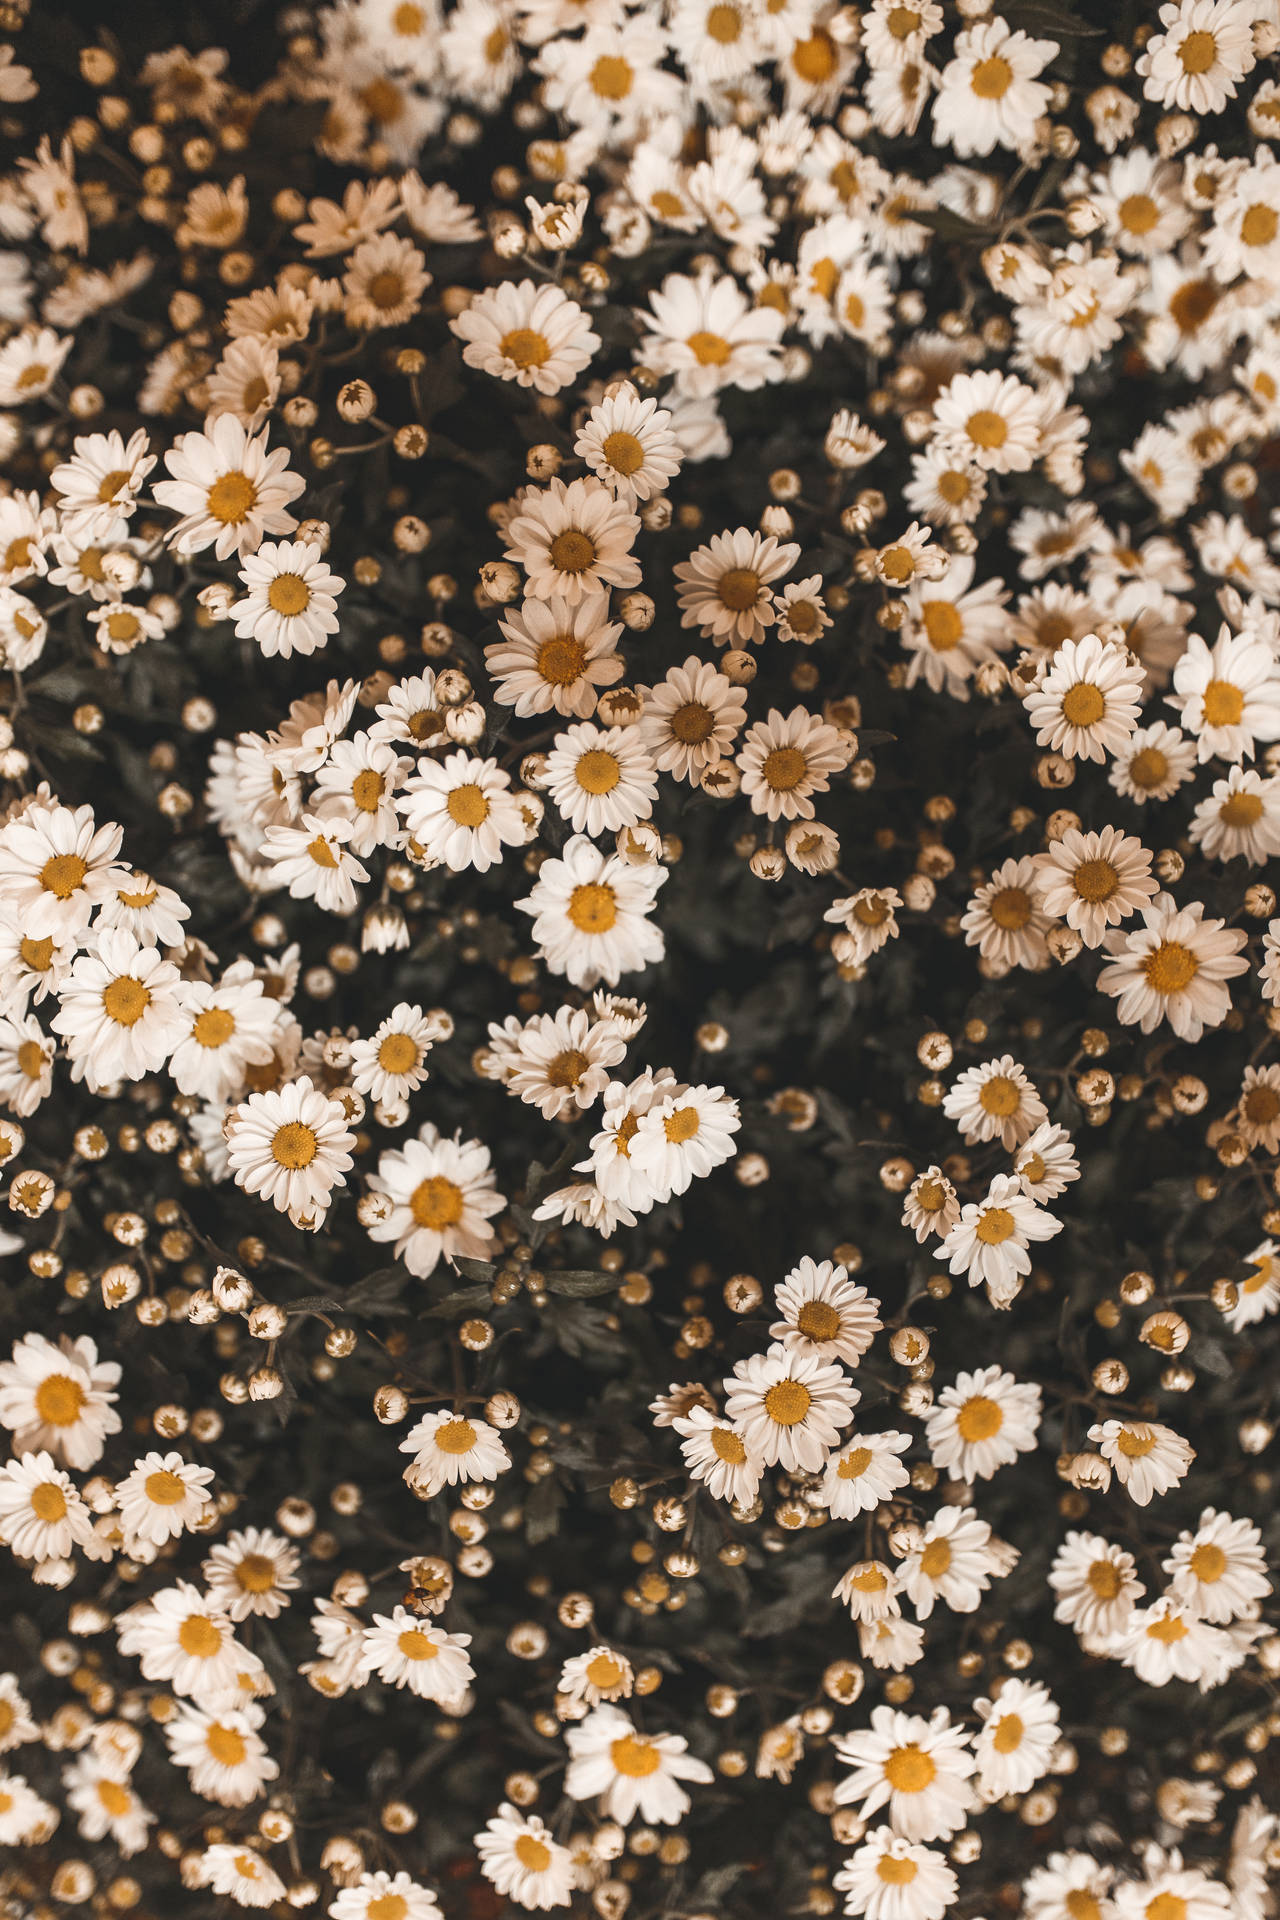 Daisy 3351X5026 Wallpaper and Background Image